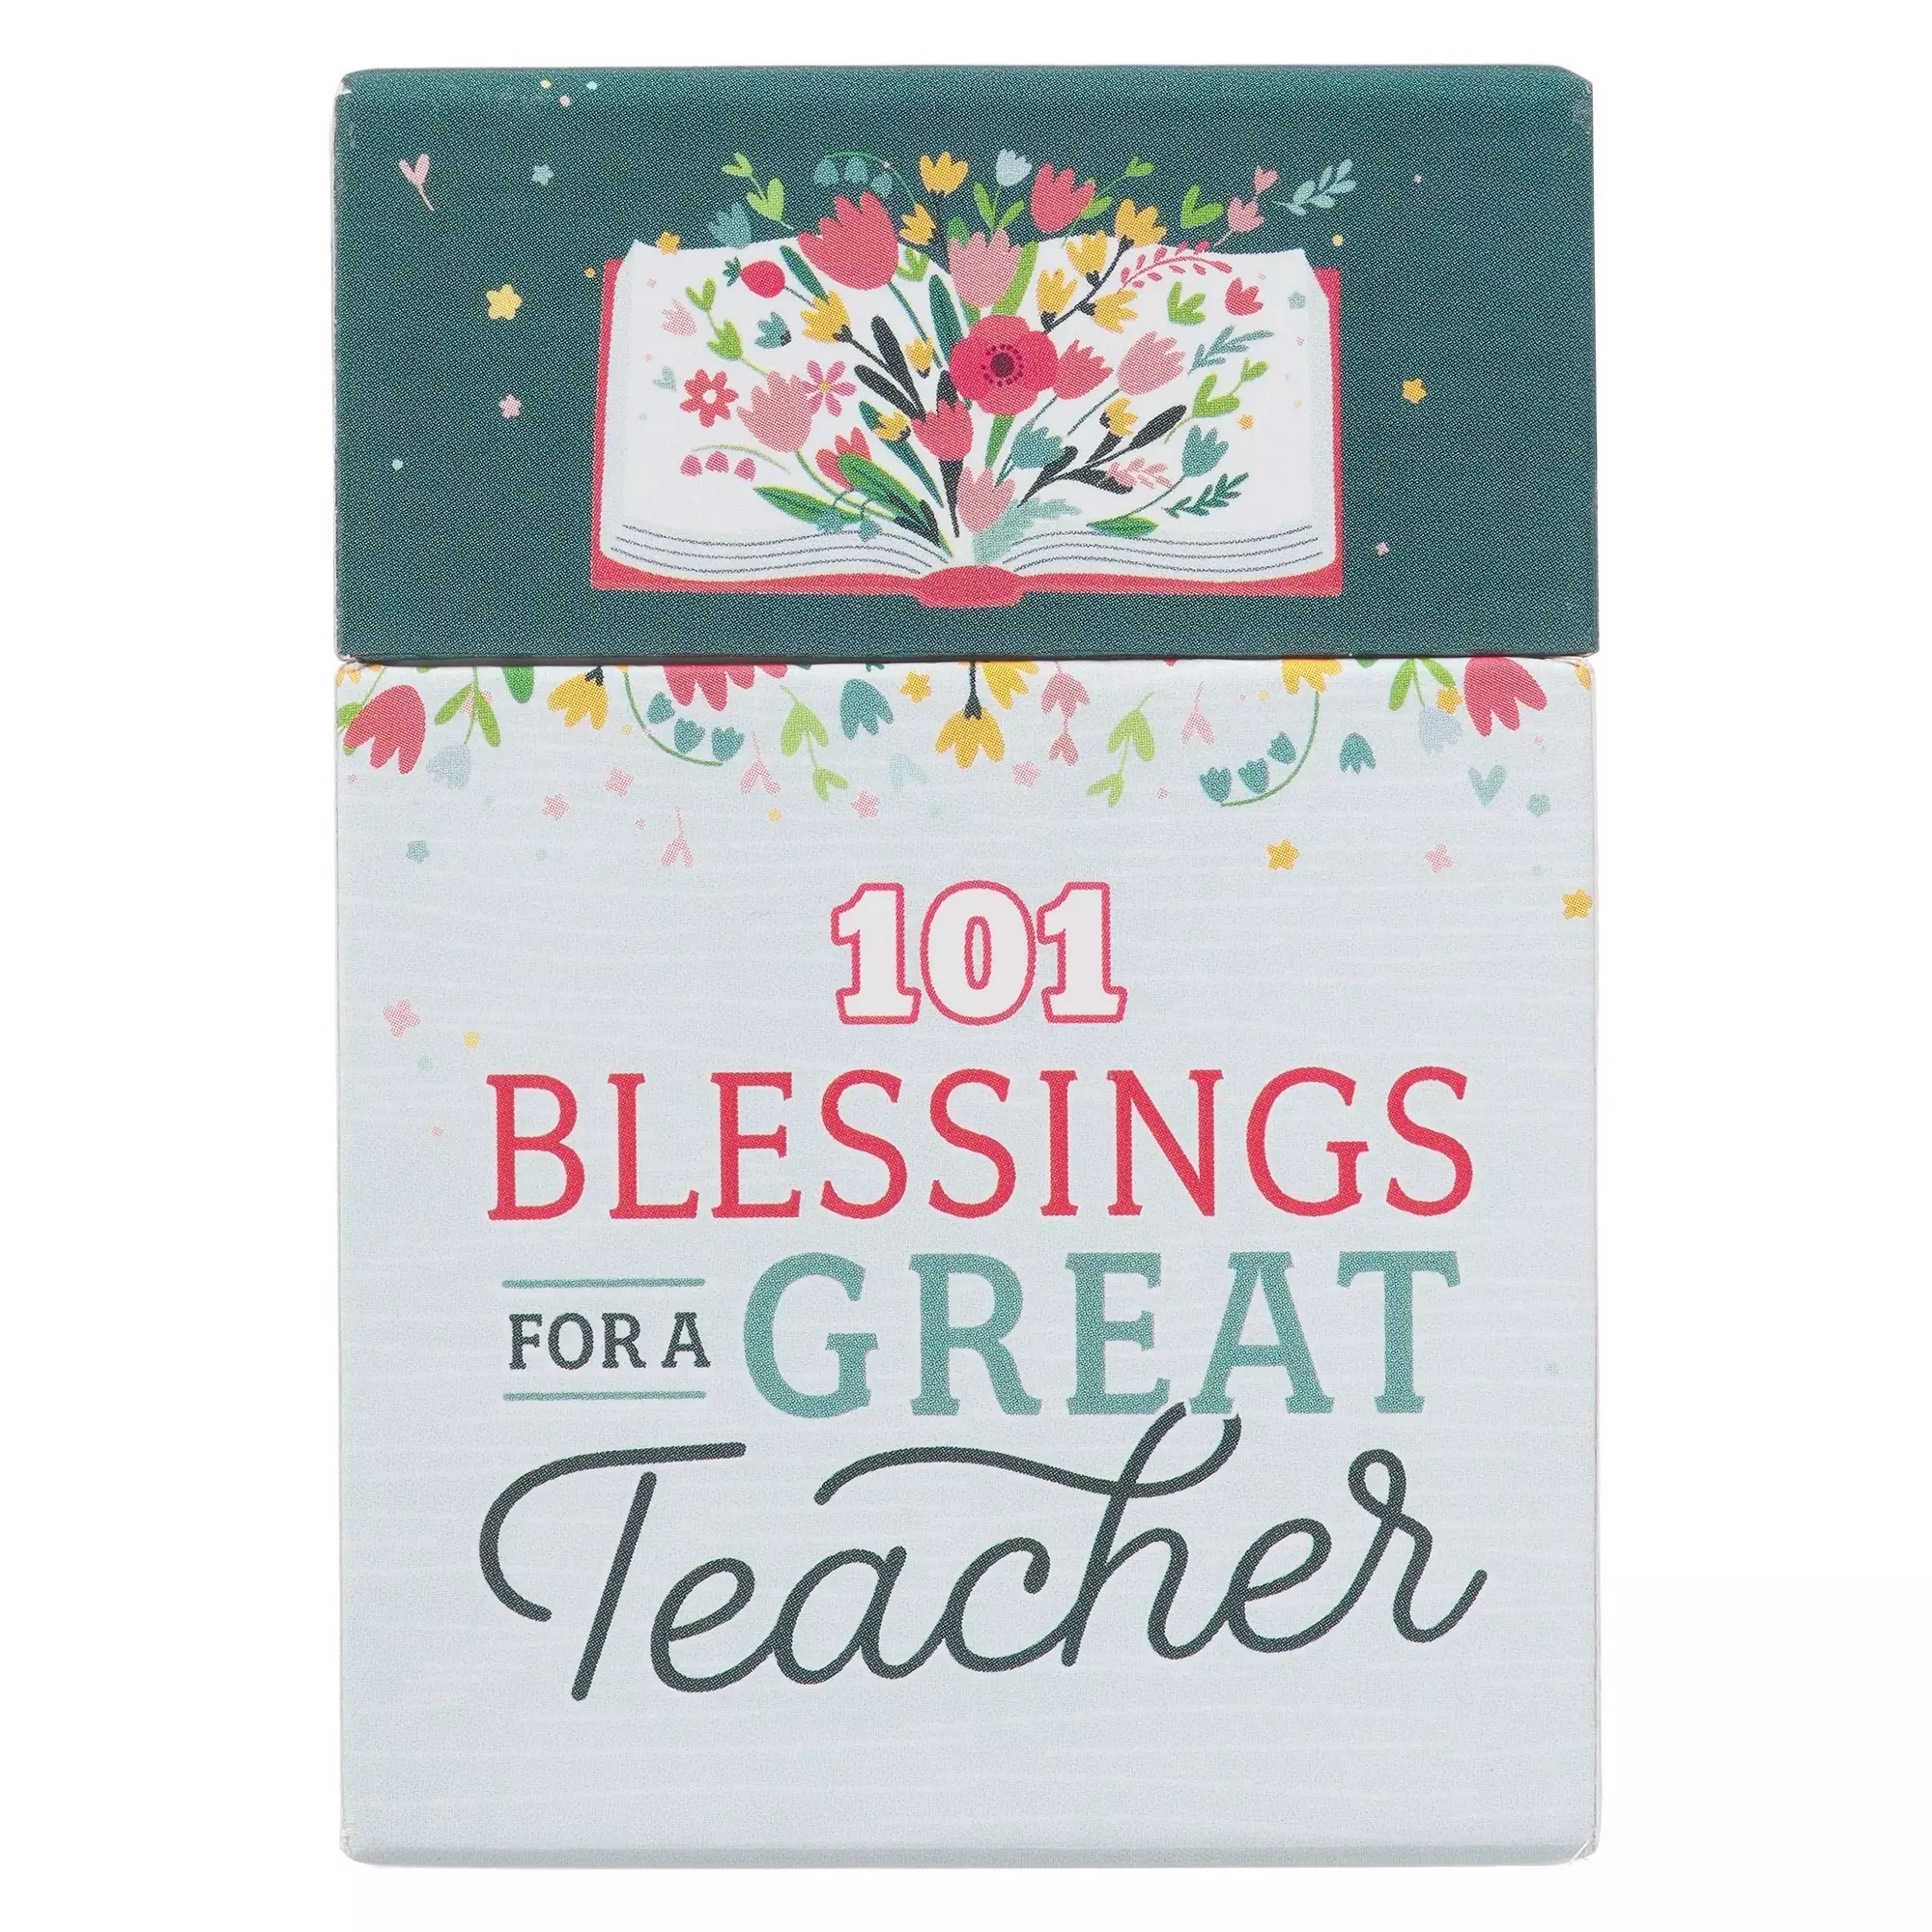 Box of Blessings for a Great Teacher